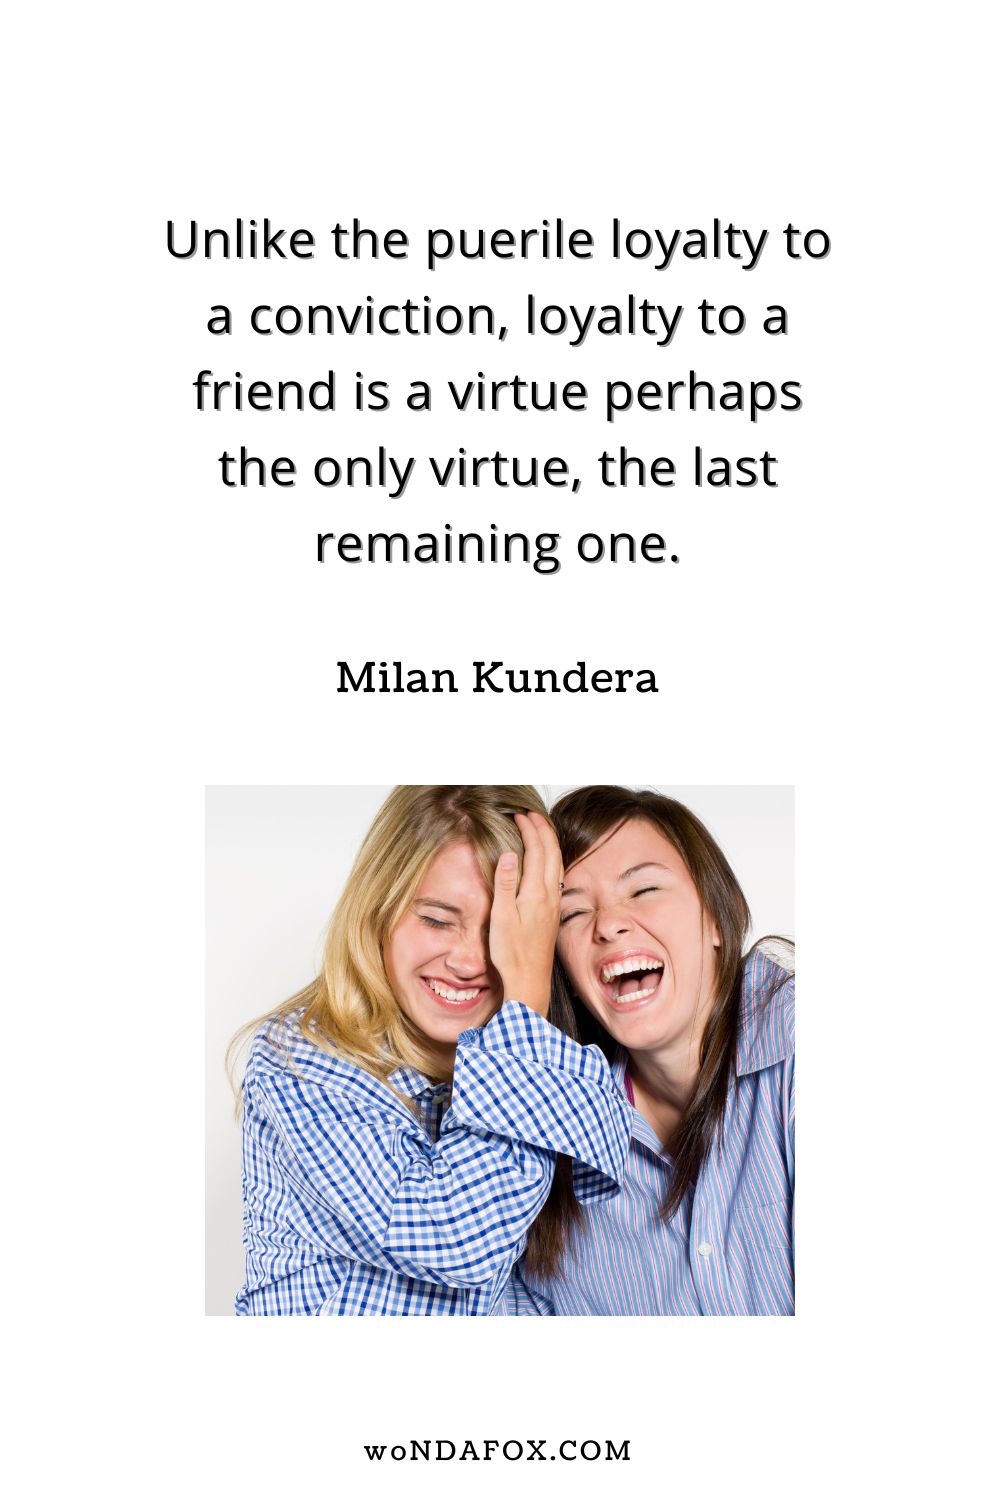 “Unlike the puerile loyalty to a conviction, loyalty to a friend is a virtue perhaps the only virtue, the last remaining one.” 